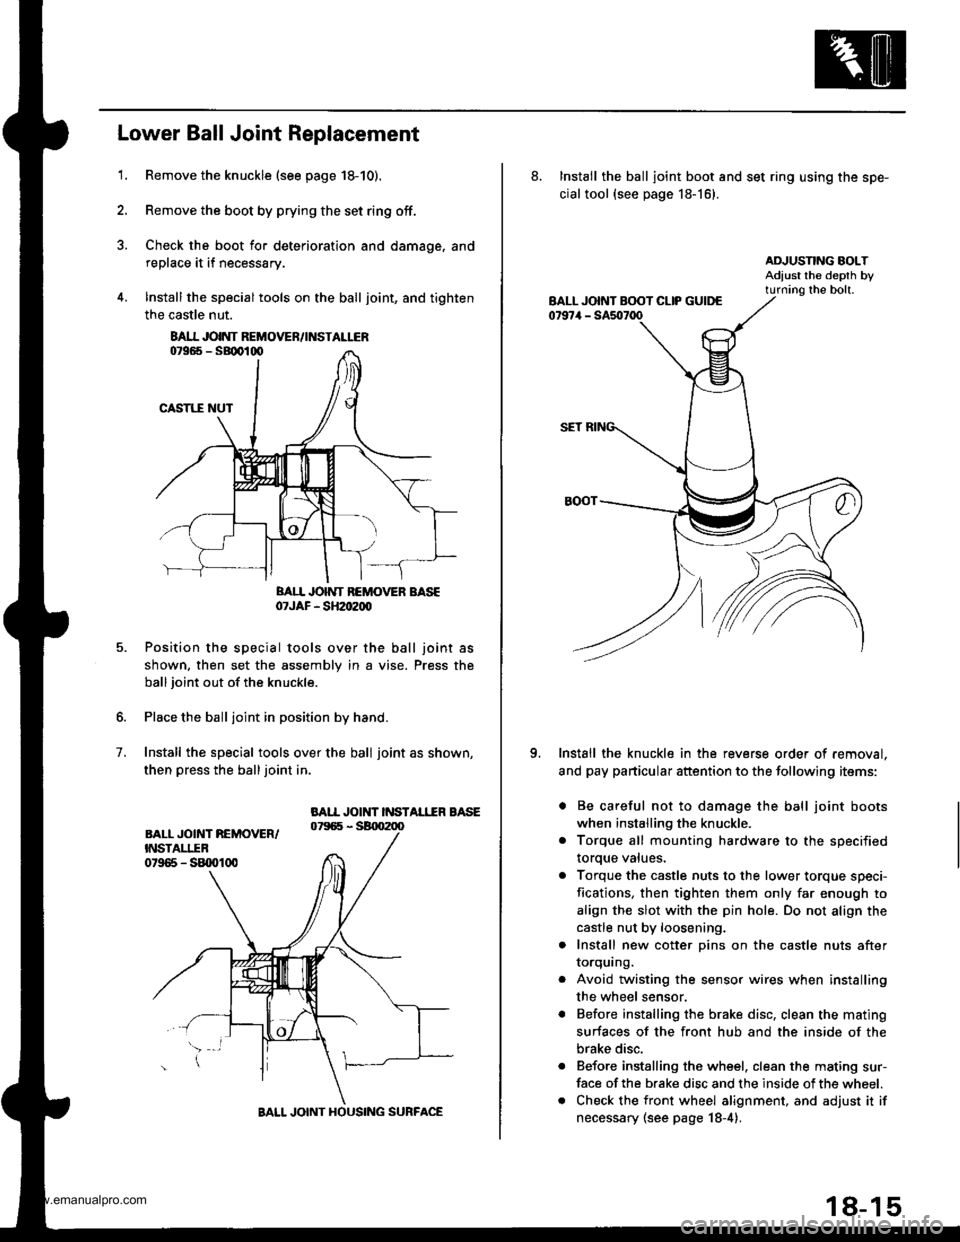 HONDA CR-V 1999 RD1-RD3 / 1.G Workshop Manual 
1.
Lower Ball Joint Replacement
Remove the knuckle (see page 18-10).
Remove the boot by prying the set ring off.
Check the boot for deterioration and damage. and
replace it if necessary.
lnstall the